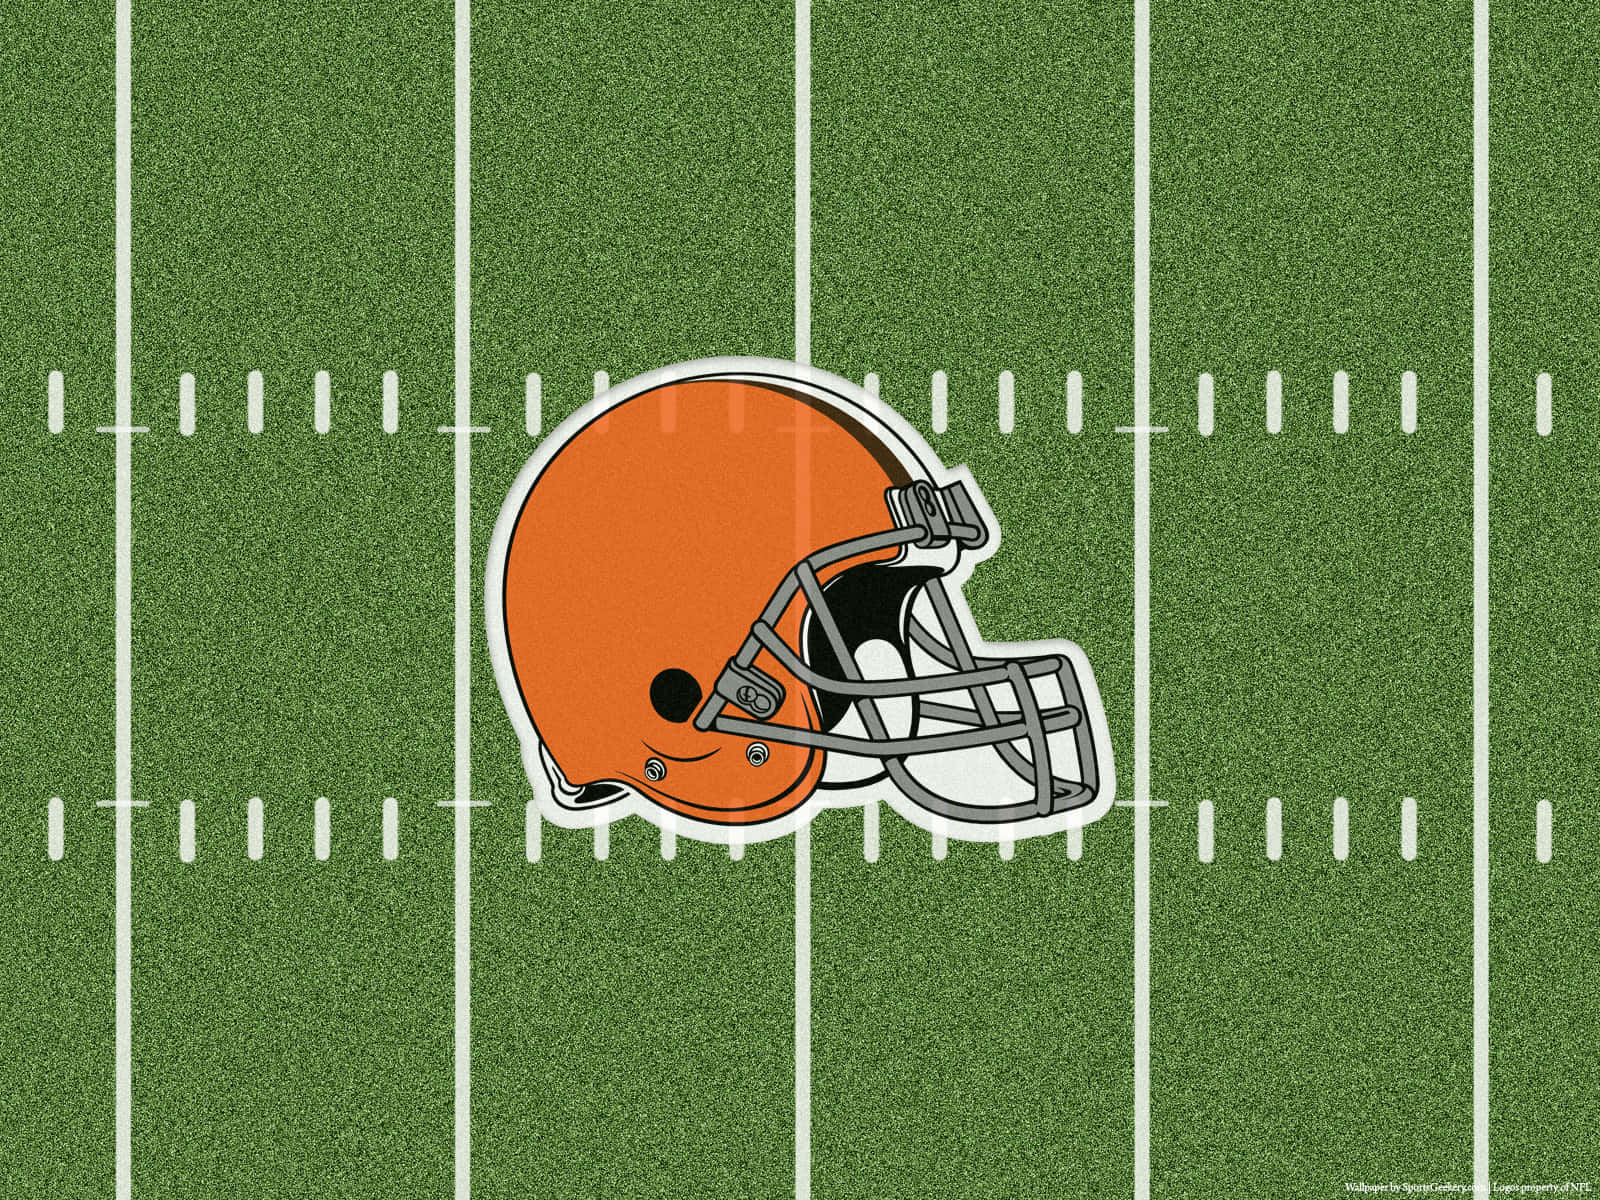 100+] Cleveland Browns Wallpapers